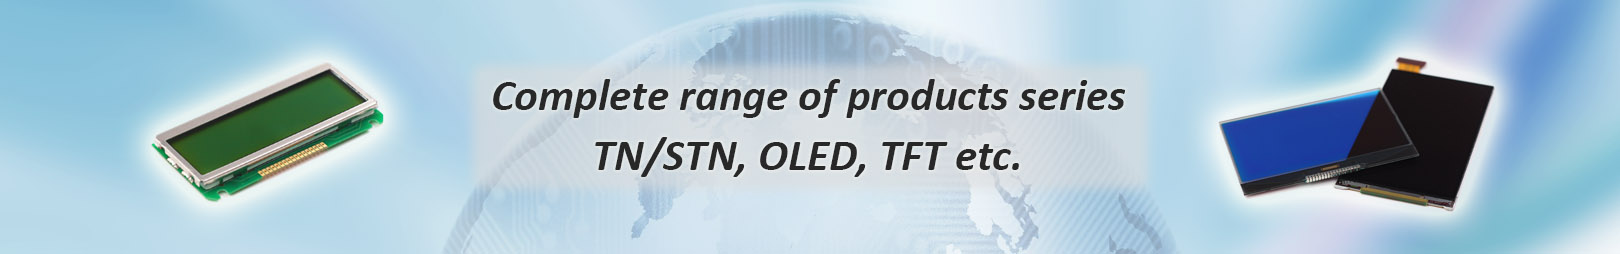 Complete range of products series TN/STN, OLED, TFT etc.